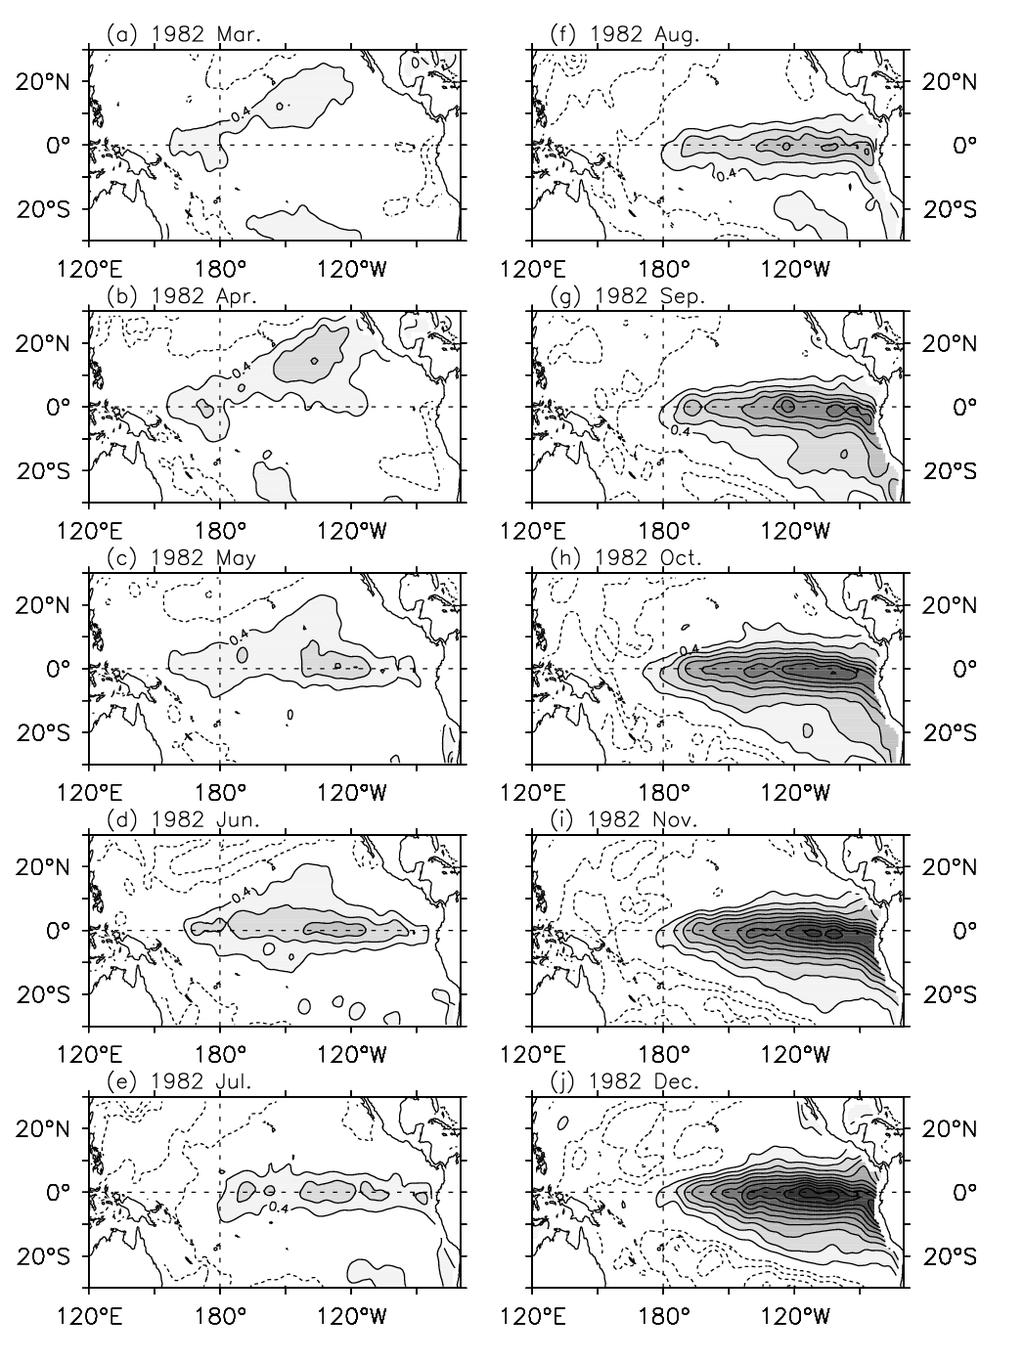 Figure 5. Evolution of the Pacific SST anomalies for the 1982/83 El Niño event.